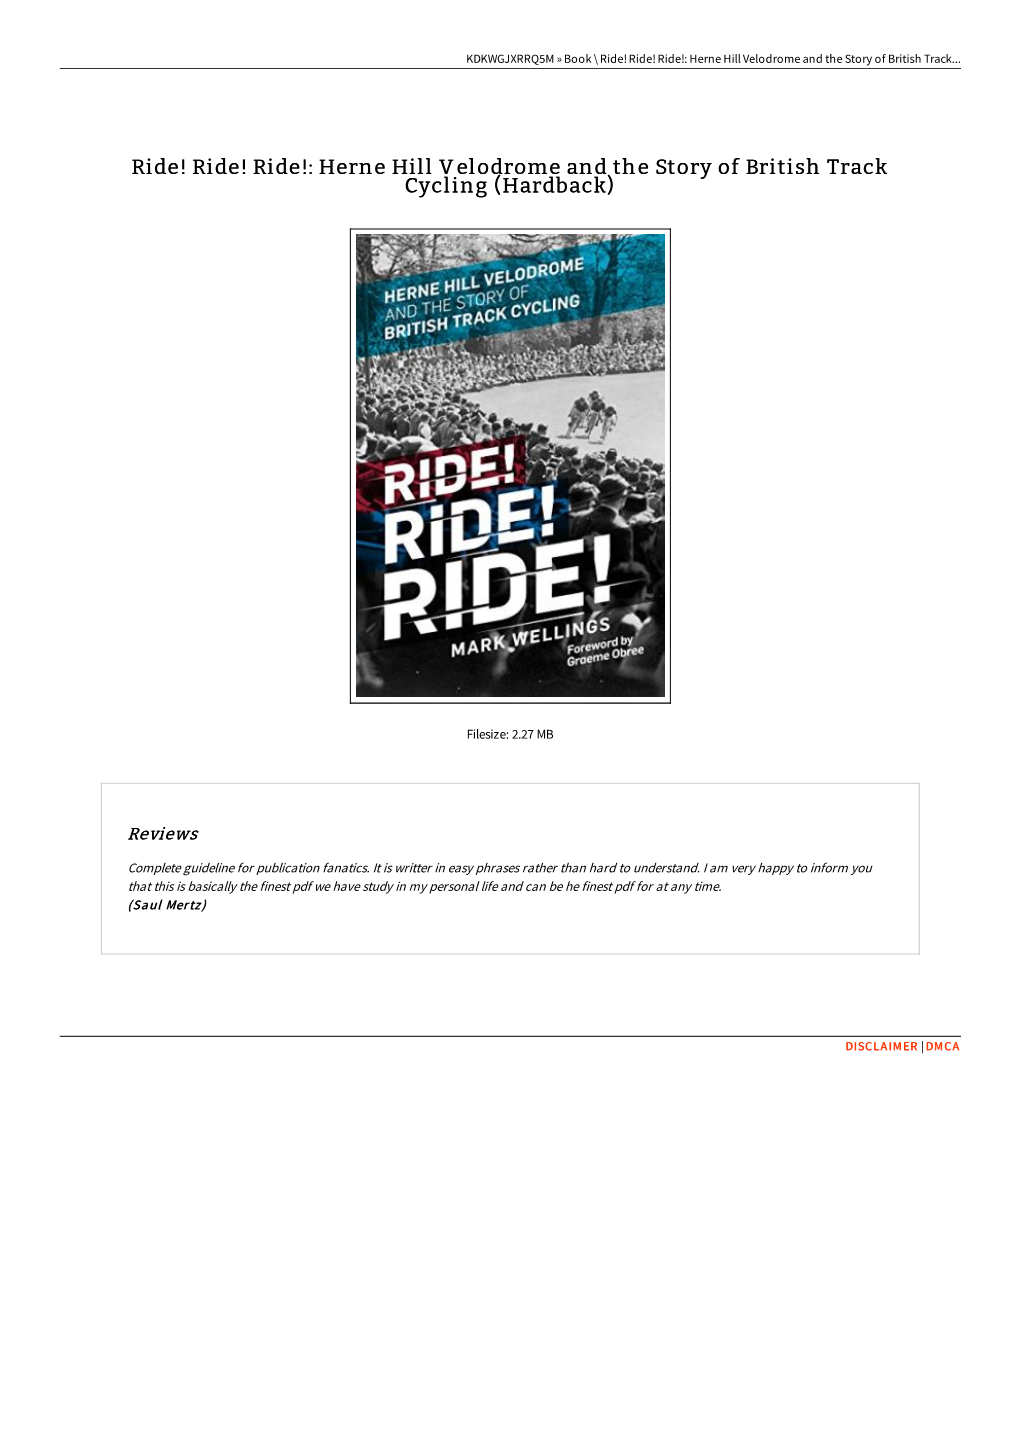 Ride! Ride!: Herne Hill Velodrome and the Story of British Track Cycling (Hardback)